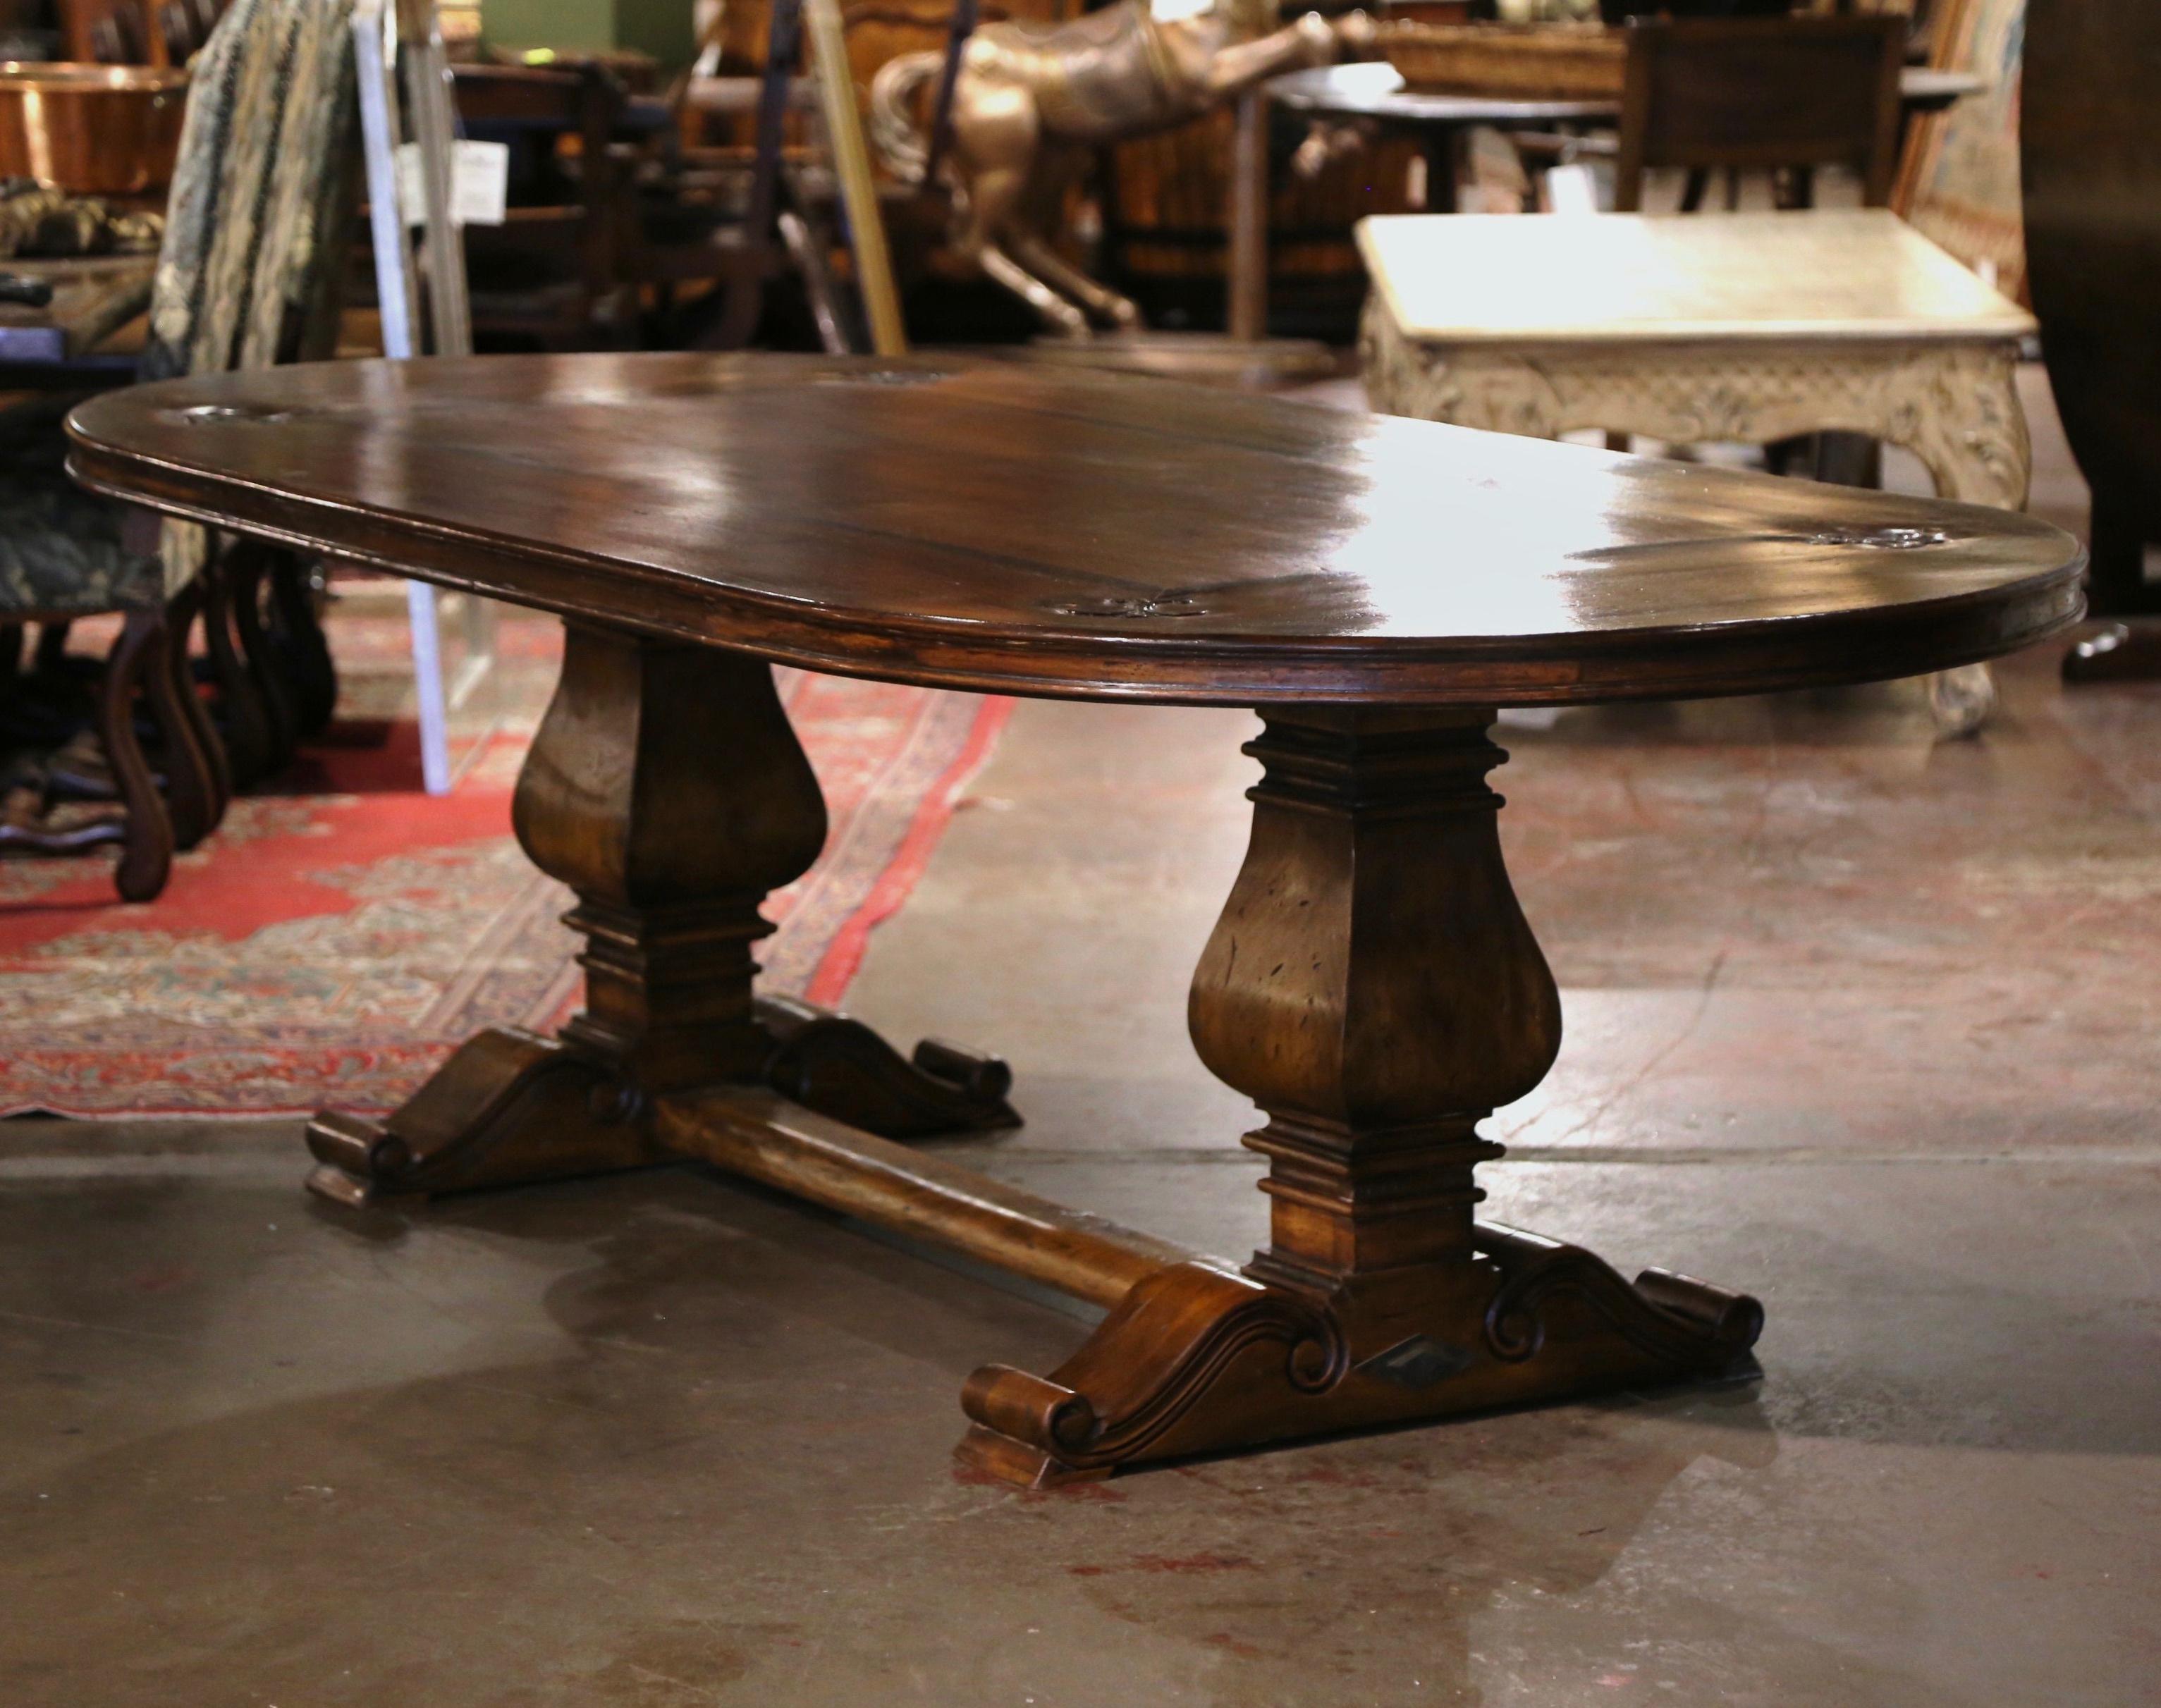 This elegant eight foot oval walnut dining room table was crafted using antique timbers, and followed an 18th century design from the Pyrenees of France. The table sits on a trestle base, supported by a pair of hand carved 